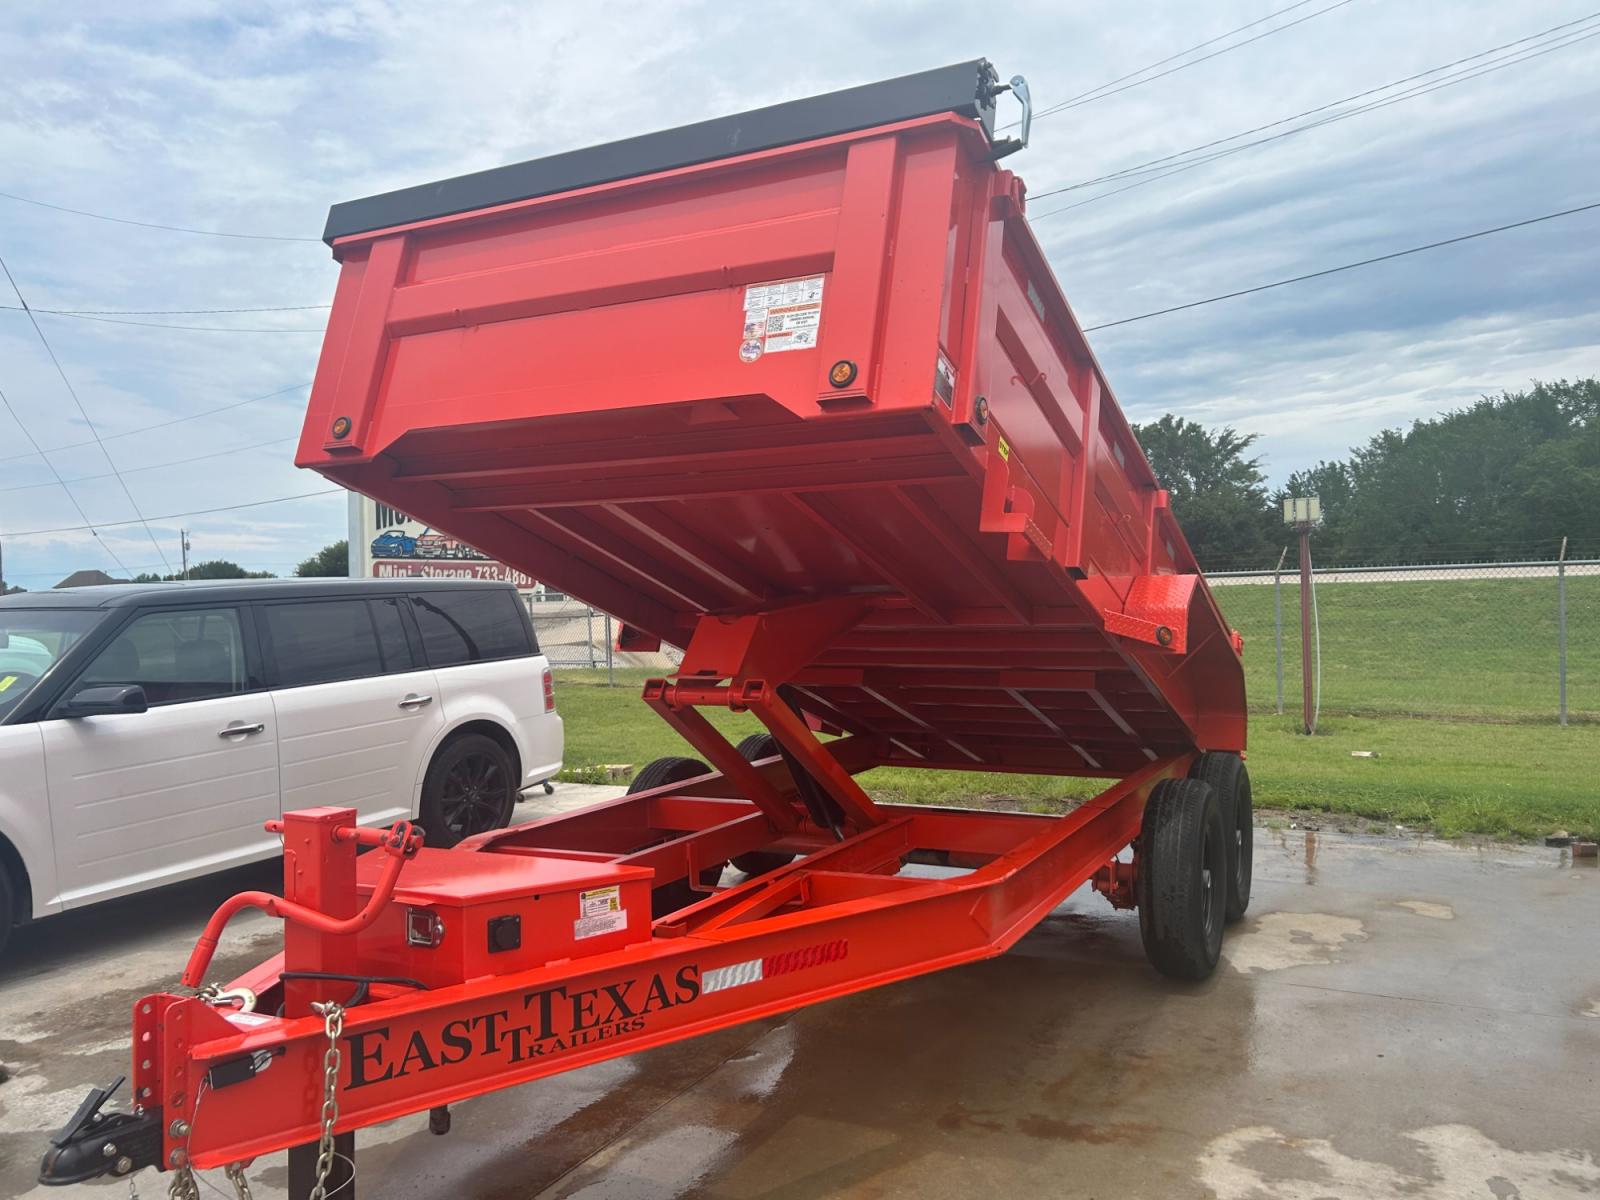 2023 ORANGE EAST TEXAS TRAILER DUMPBED (58SBD1627PE) , located at 17760 Hwy 62, Morris, OK, 74445, 35.609104, -95.877060 - 2023 EAST TEXAS DUMP BED TRAILER IS 16X83, 14,000 GVWR, 2-7000 LB DEXTER ELECTRIC BREAK SYSTEM, TONGUE MOUNTED TOOL BOX, 7 GA FLOOR, 80" SLIDE IN RAMPS, 7 WAY PLUG, LED LIGHTS, 24" HIGH 10 GA. SIDES, 6" 12 LB I-BEAM FRAME, 6" 12 LB I-BEAM TONGUE. TITLE IN HAND. TRAILER IS BASICALLY NEW AND HAS ONLY - Photo #8